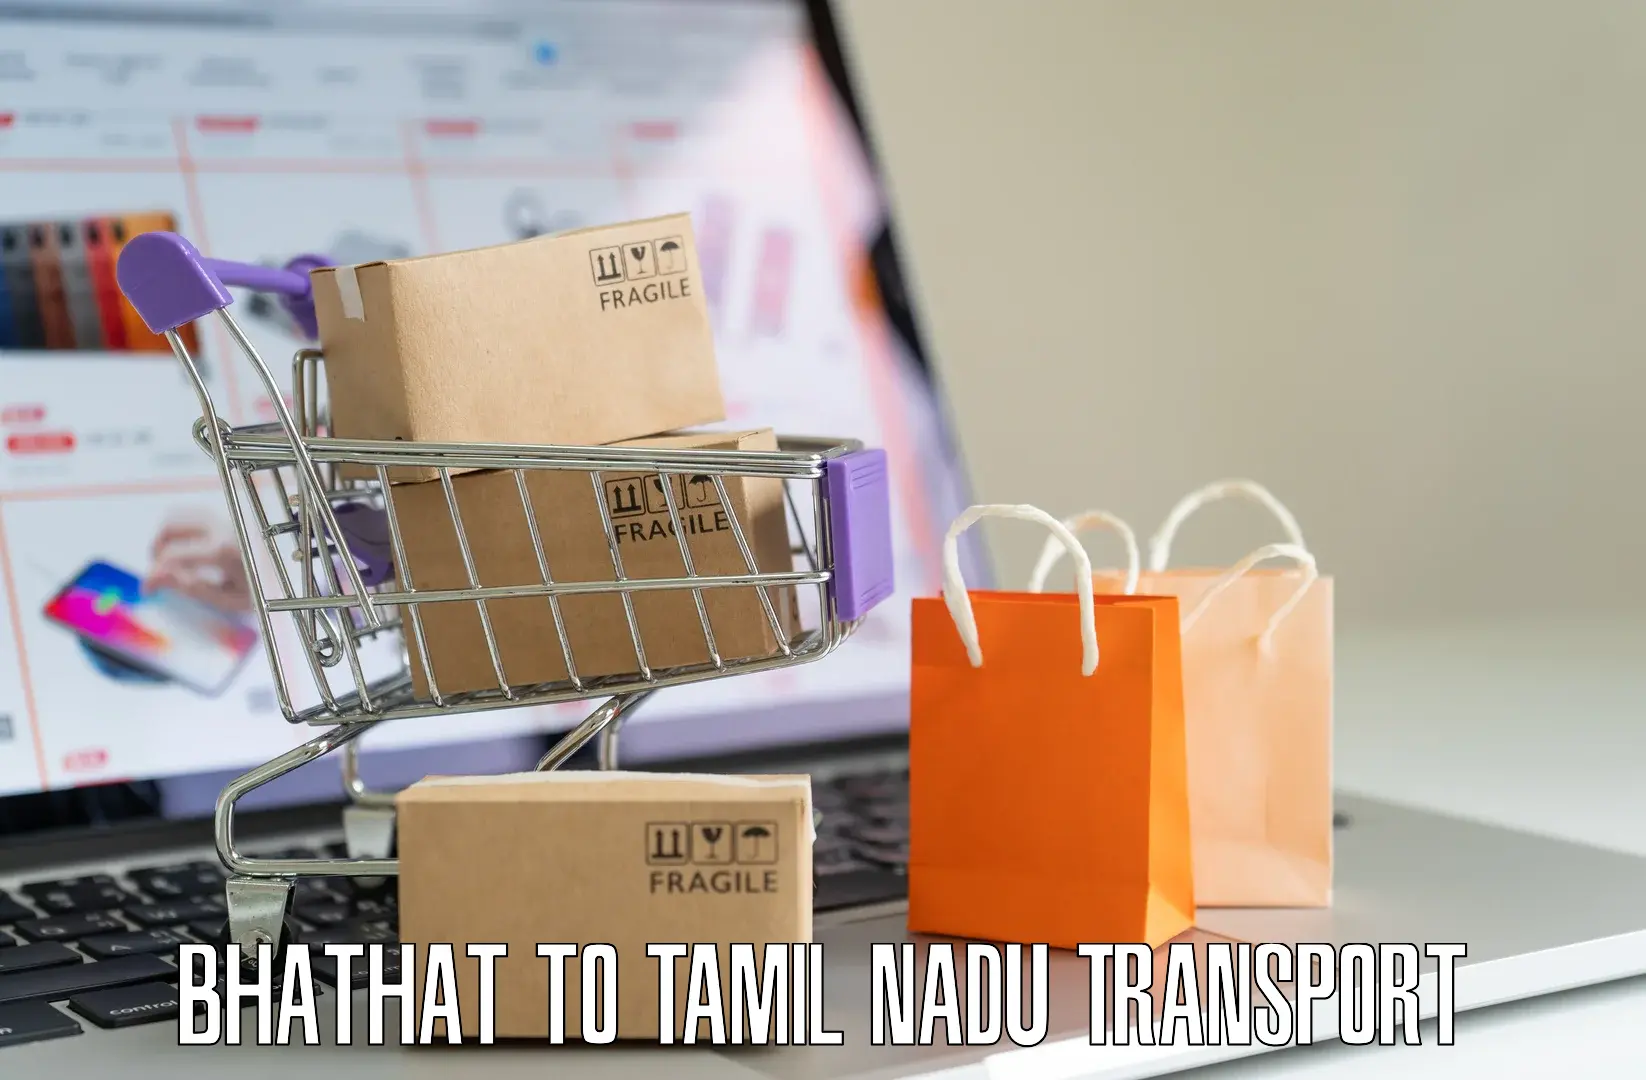 Container transport service Bhathat to Tamil Nadu